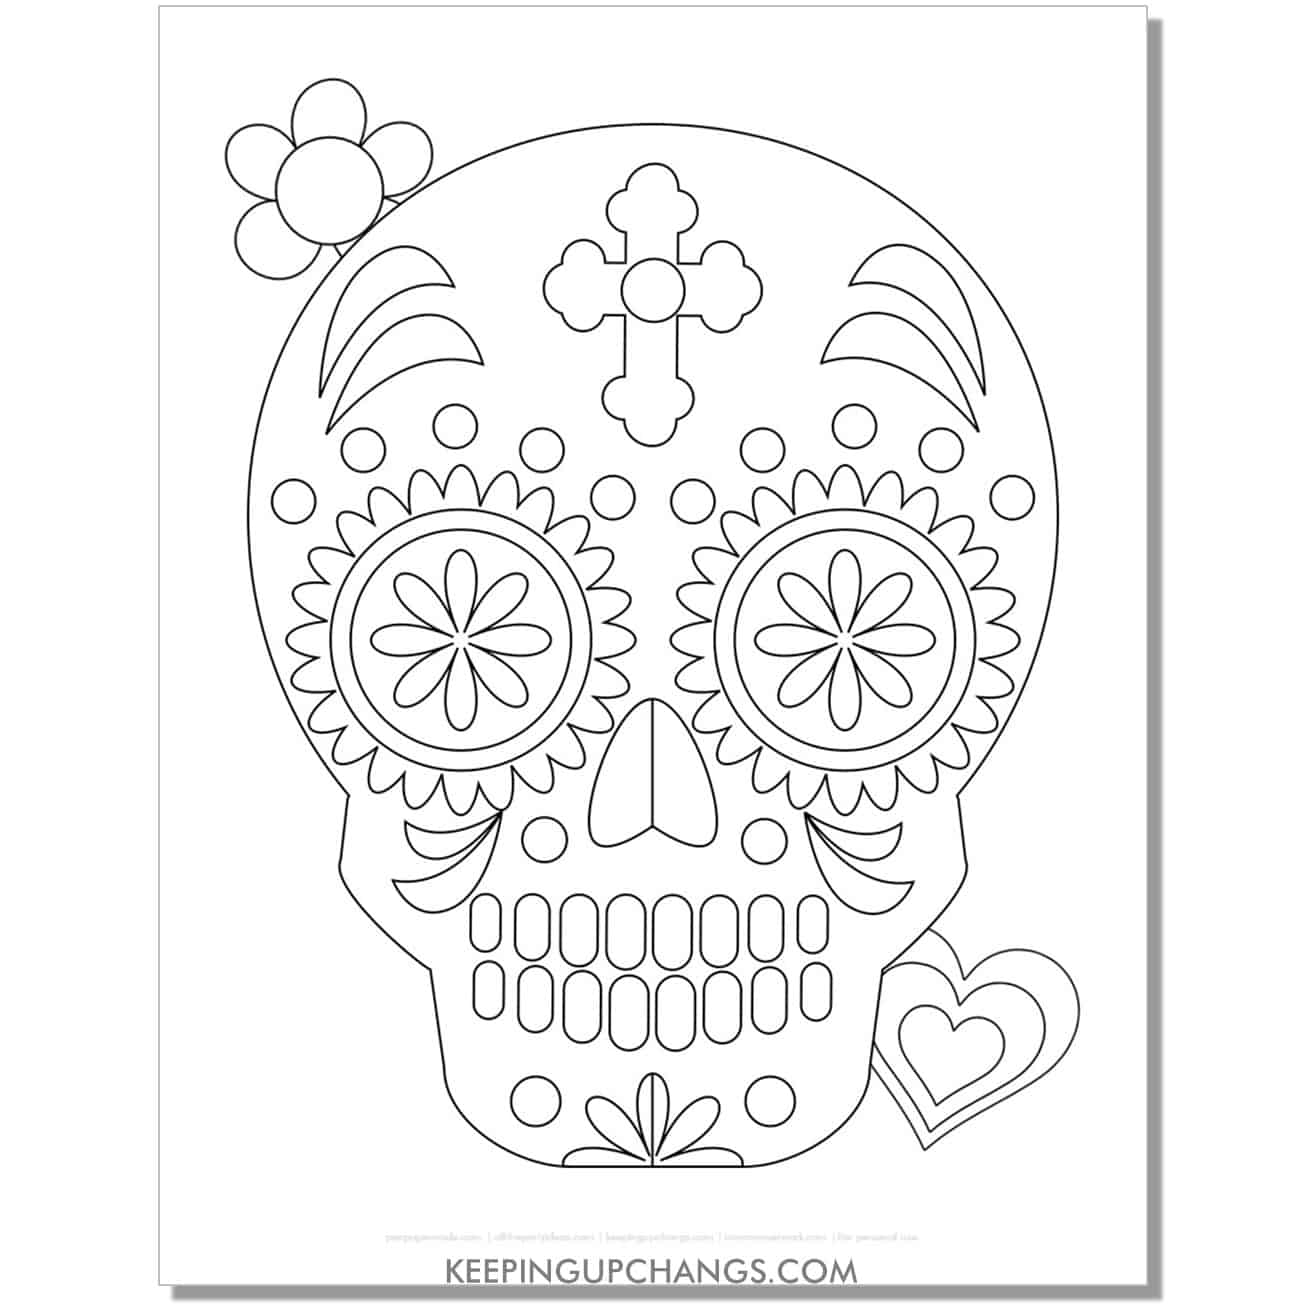 Free skeleton coloring pages sheets most popular printables